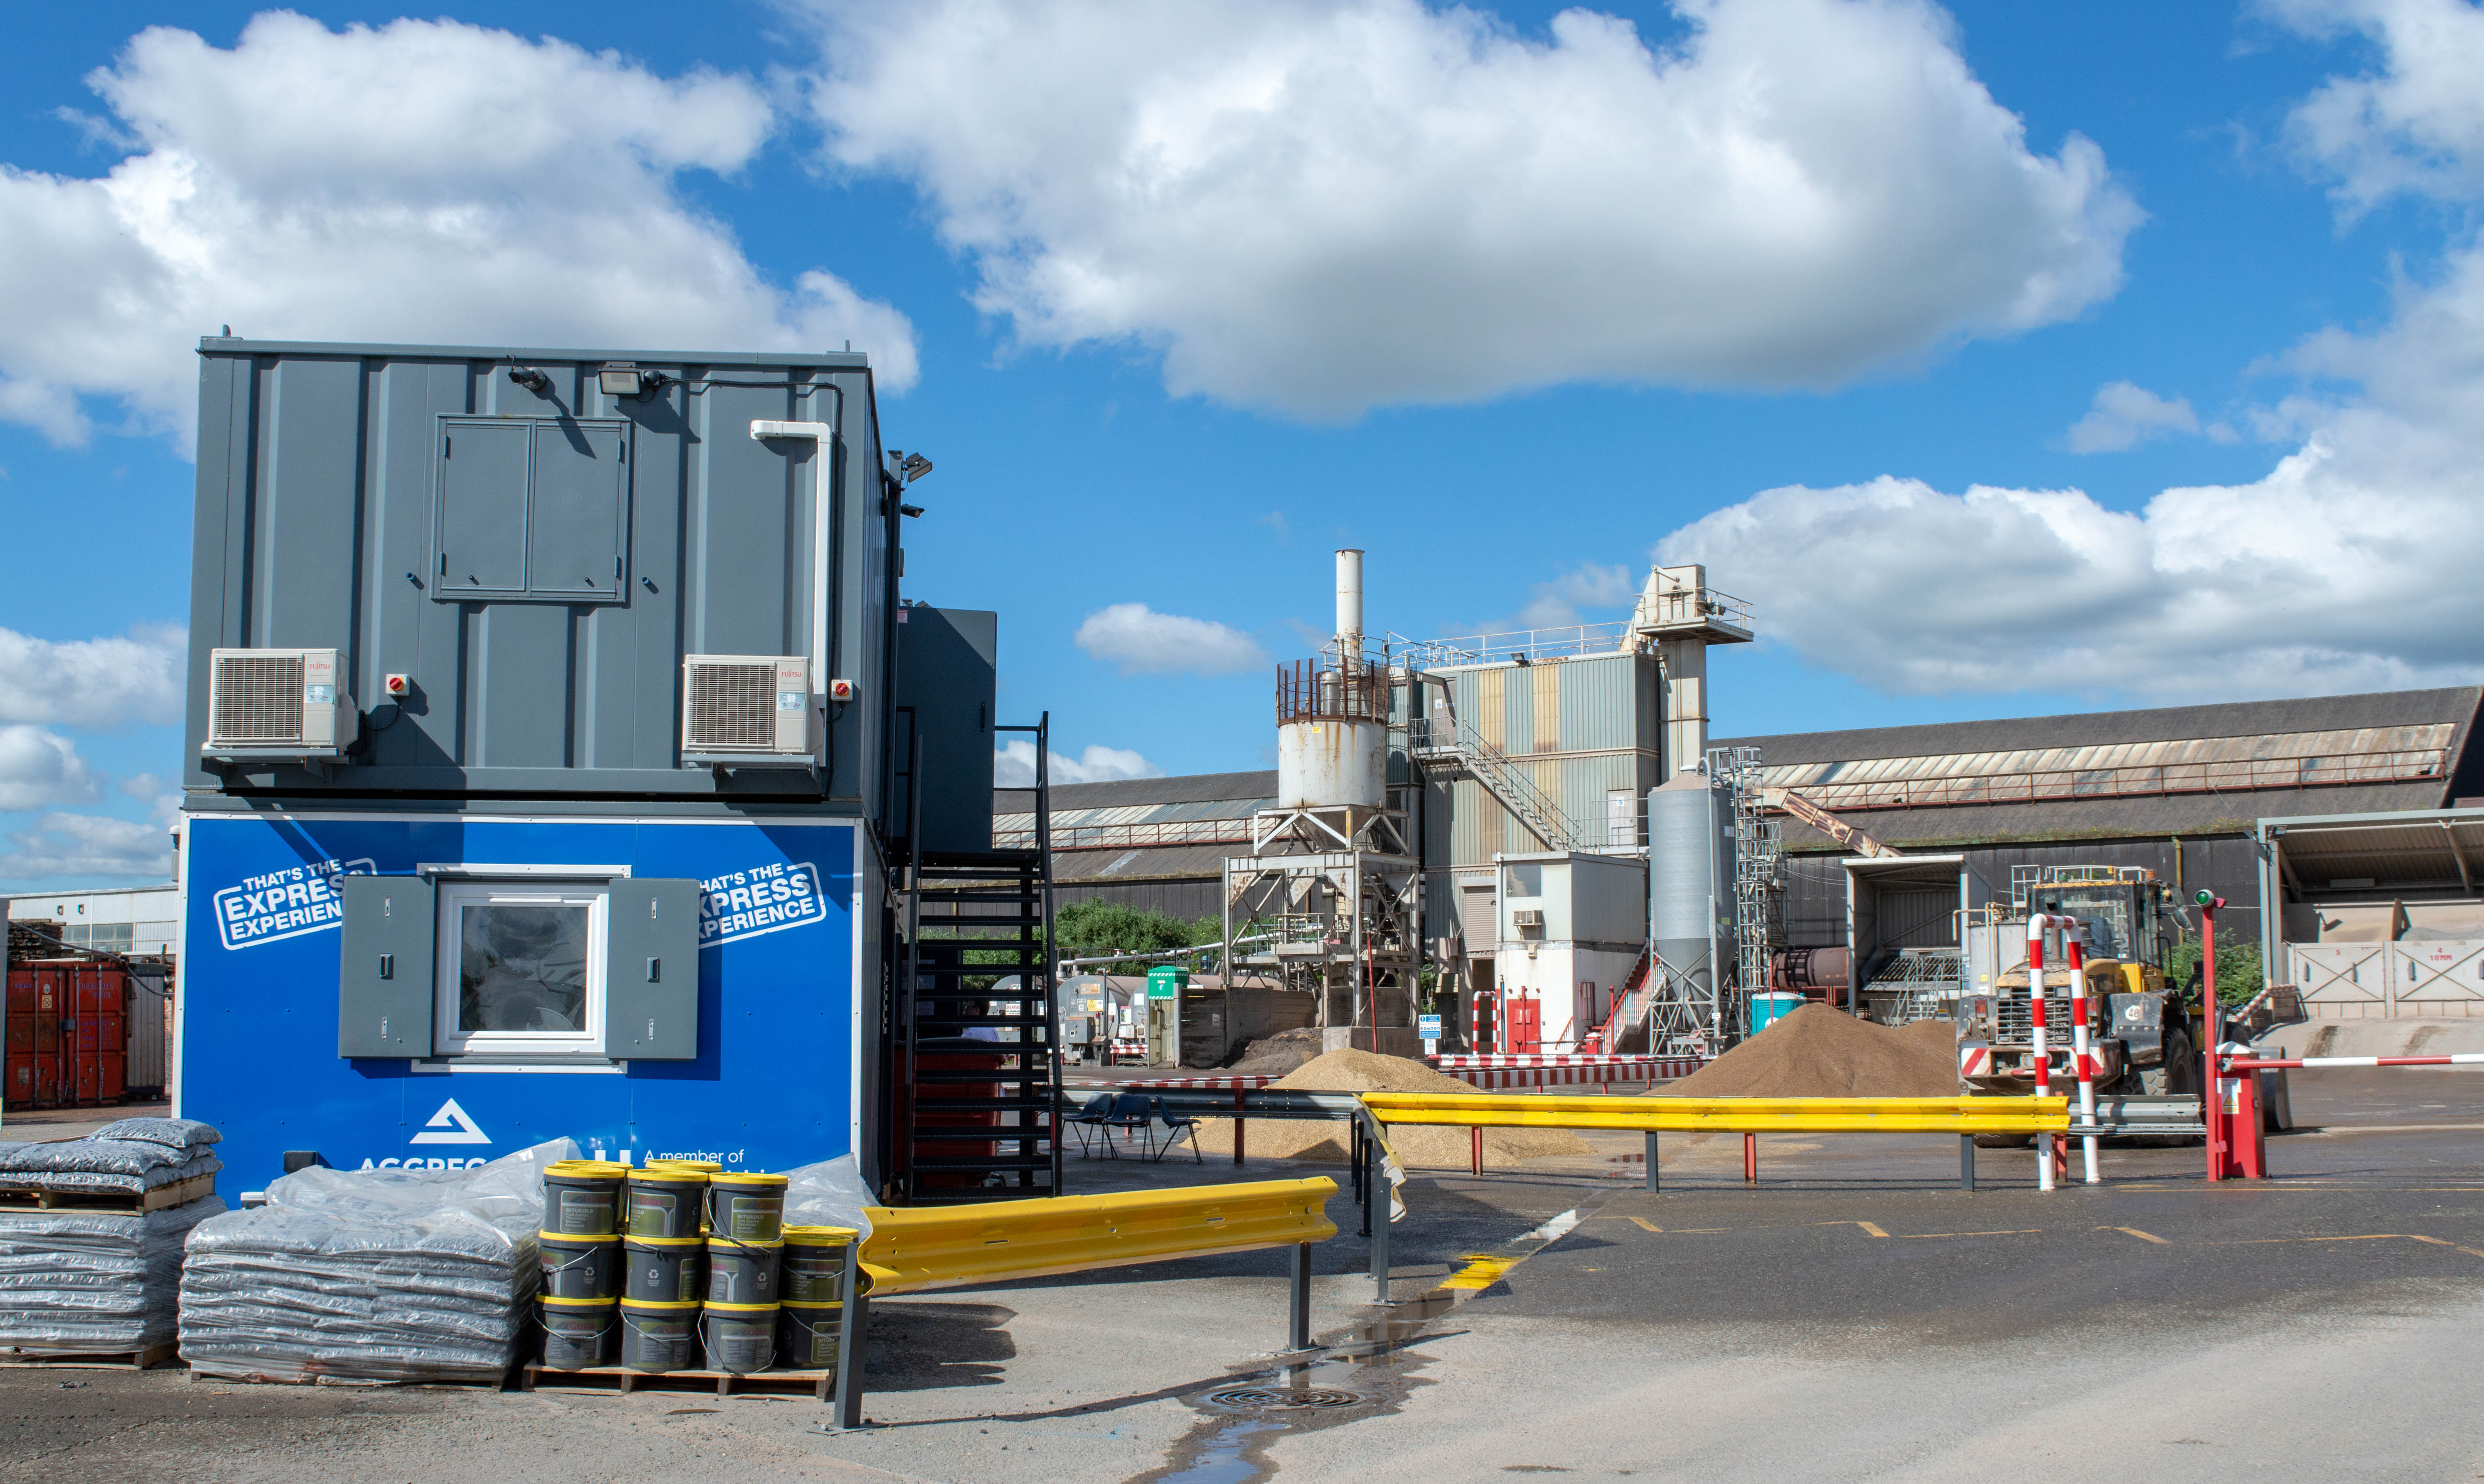 Aggregate Industries opens new Doncaster sampling lab